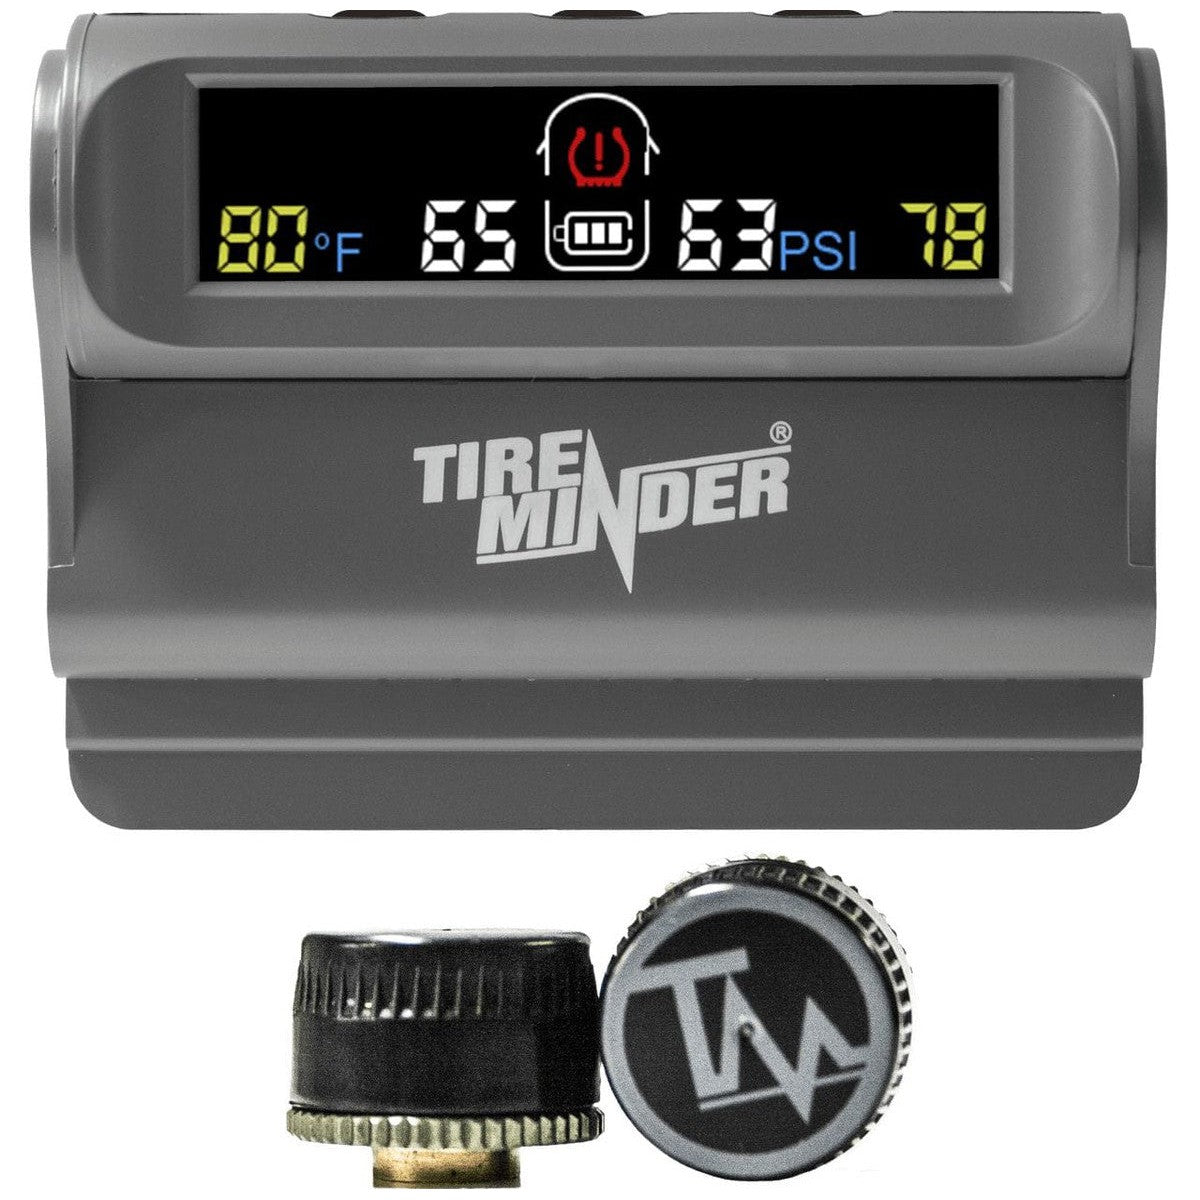 Minder Research Qualifies for Free Shipping Minder 2-Tire Pressure Monitor System #TM22138